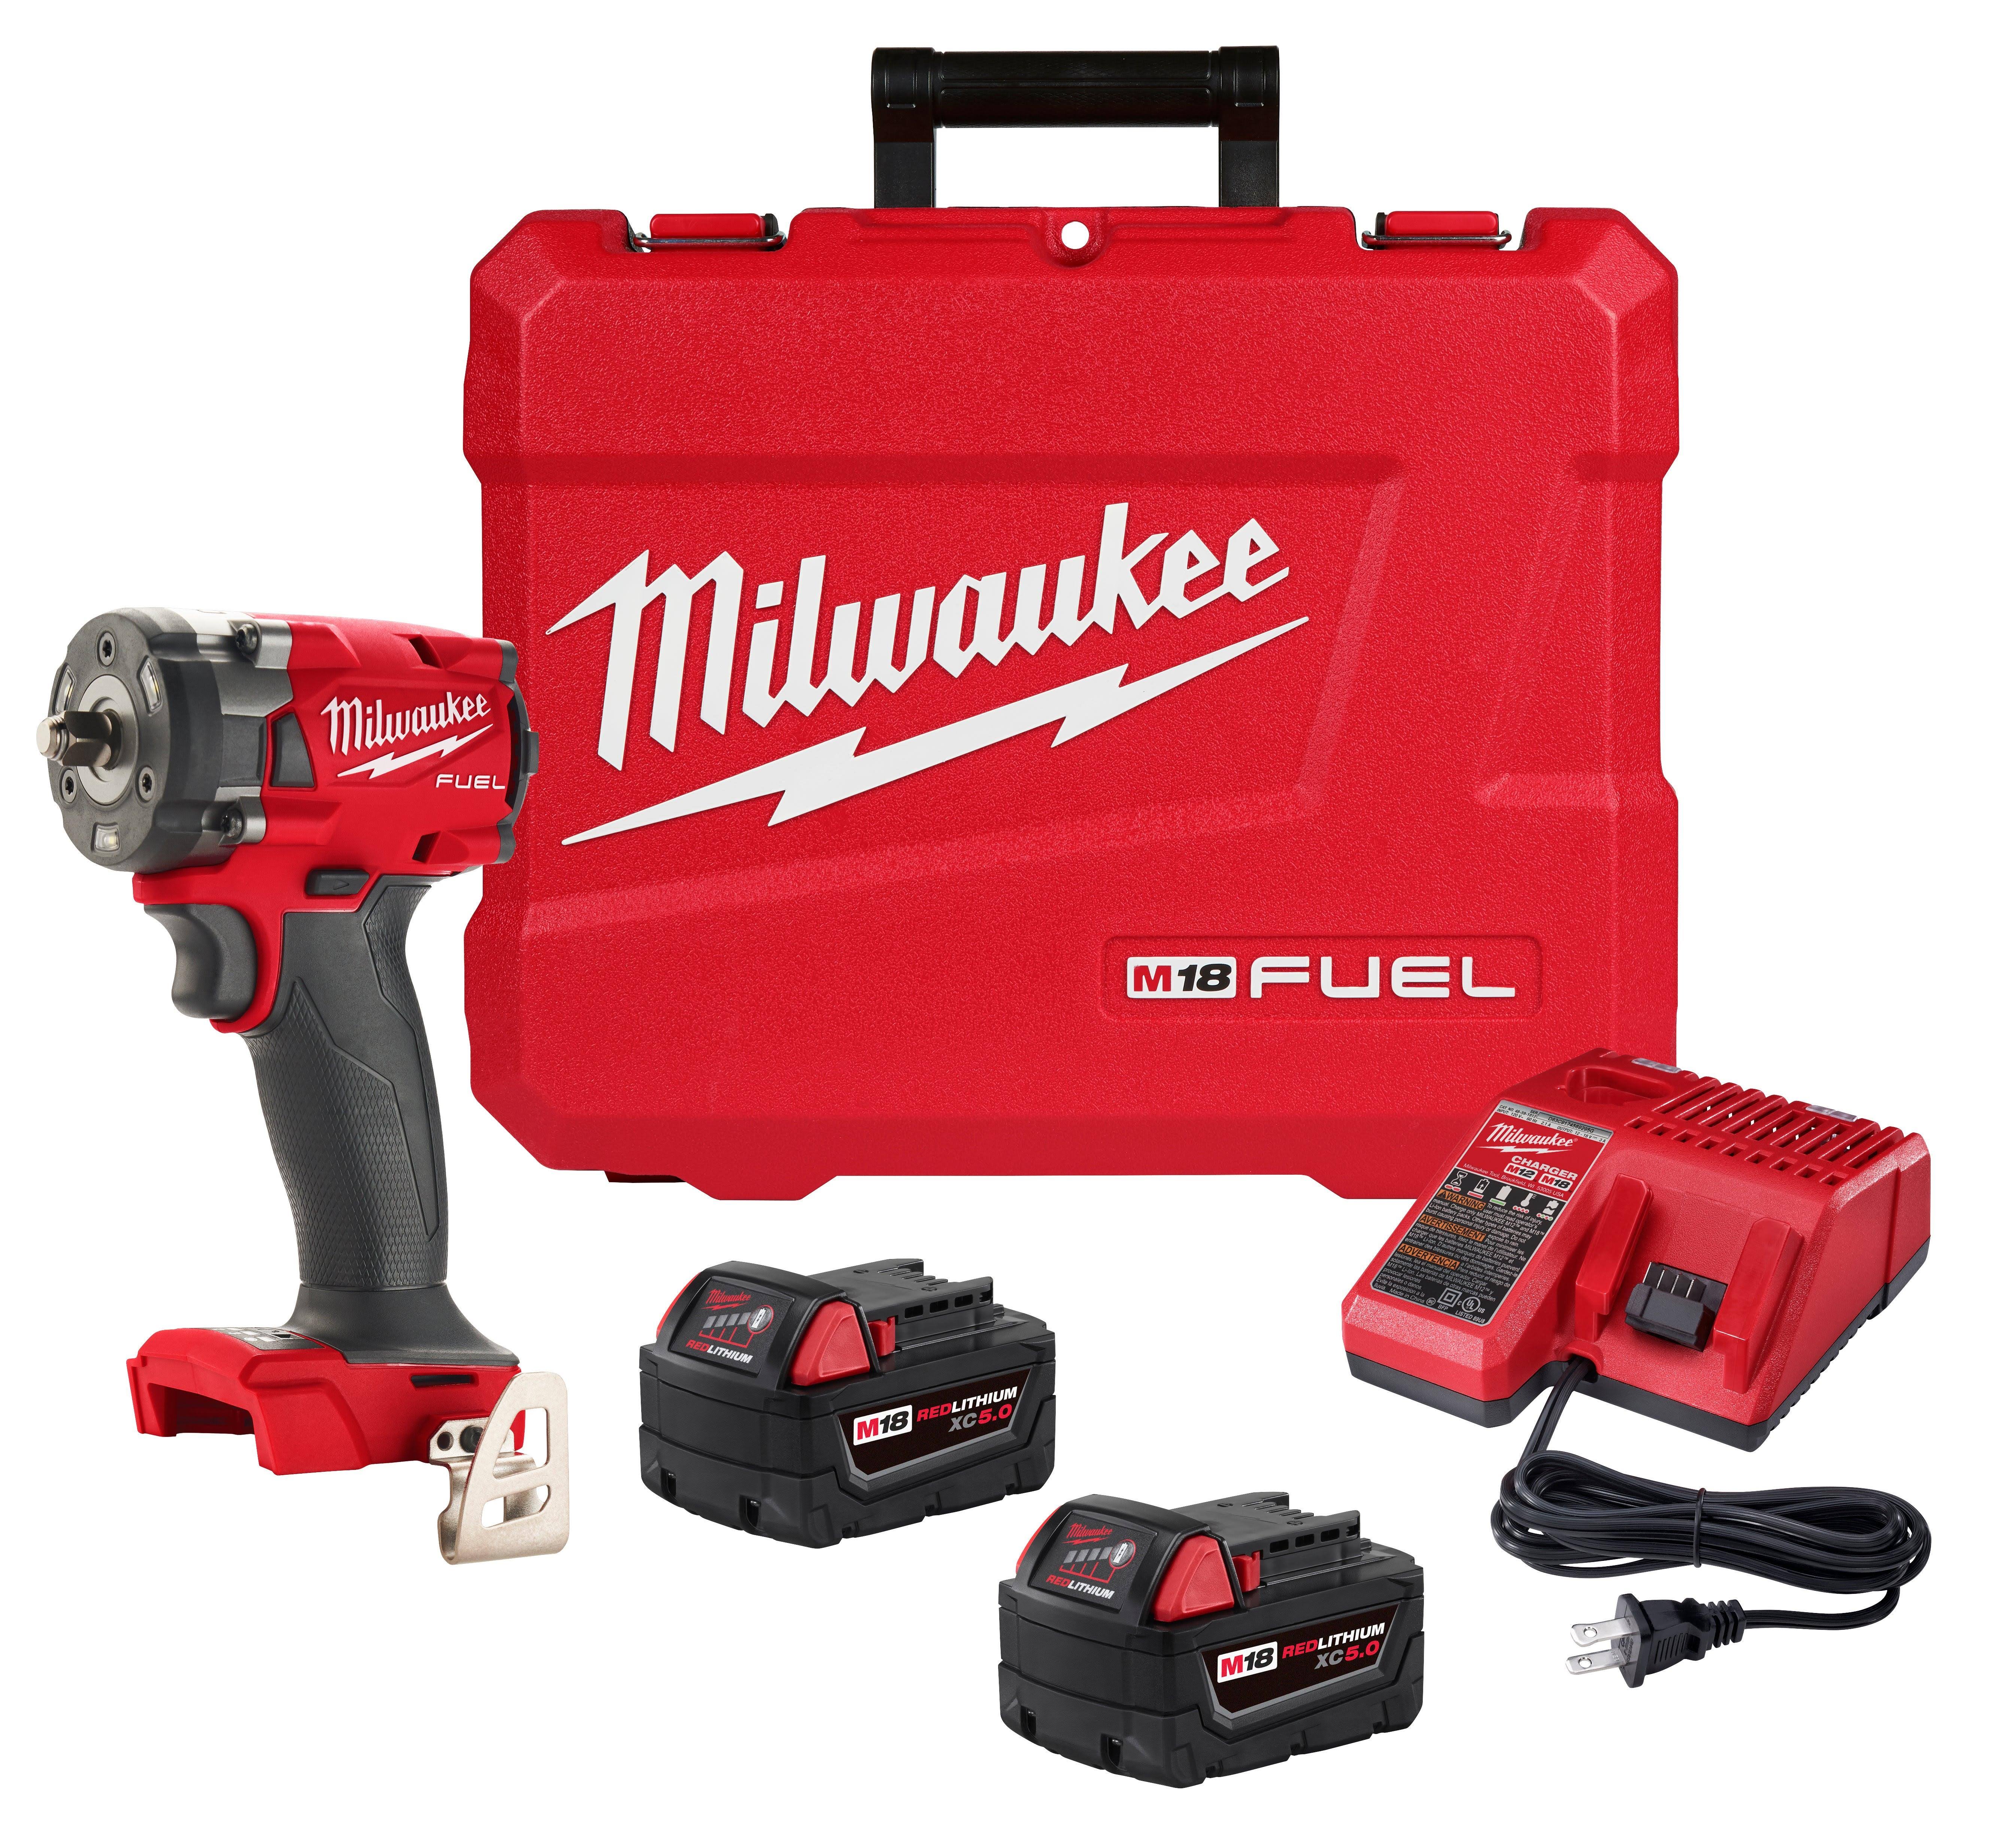 Milwaukee 2854 22 M18 Fuel Gen 3 18V Li Ion 3 8 in Compact Impact Wrench Kit